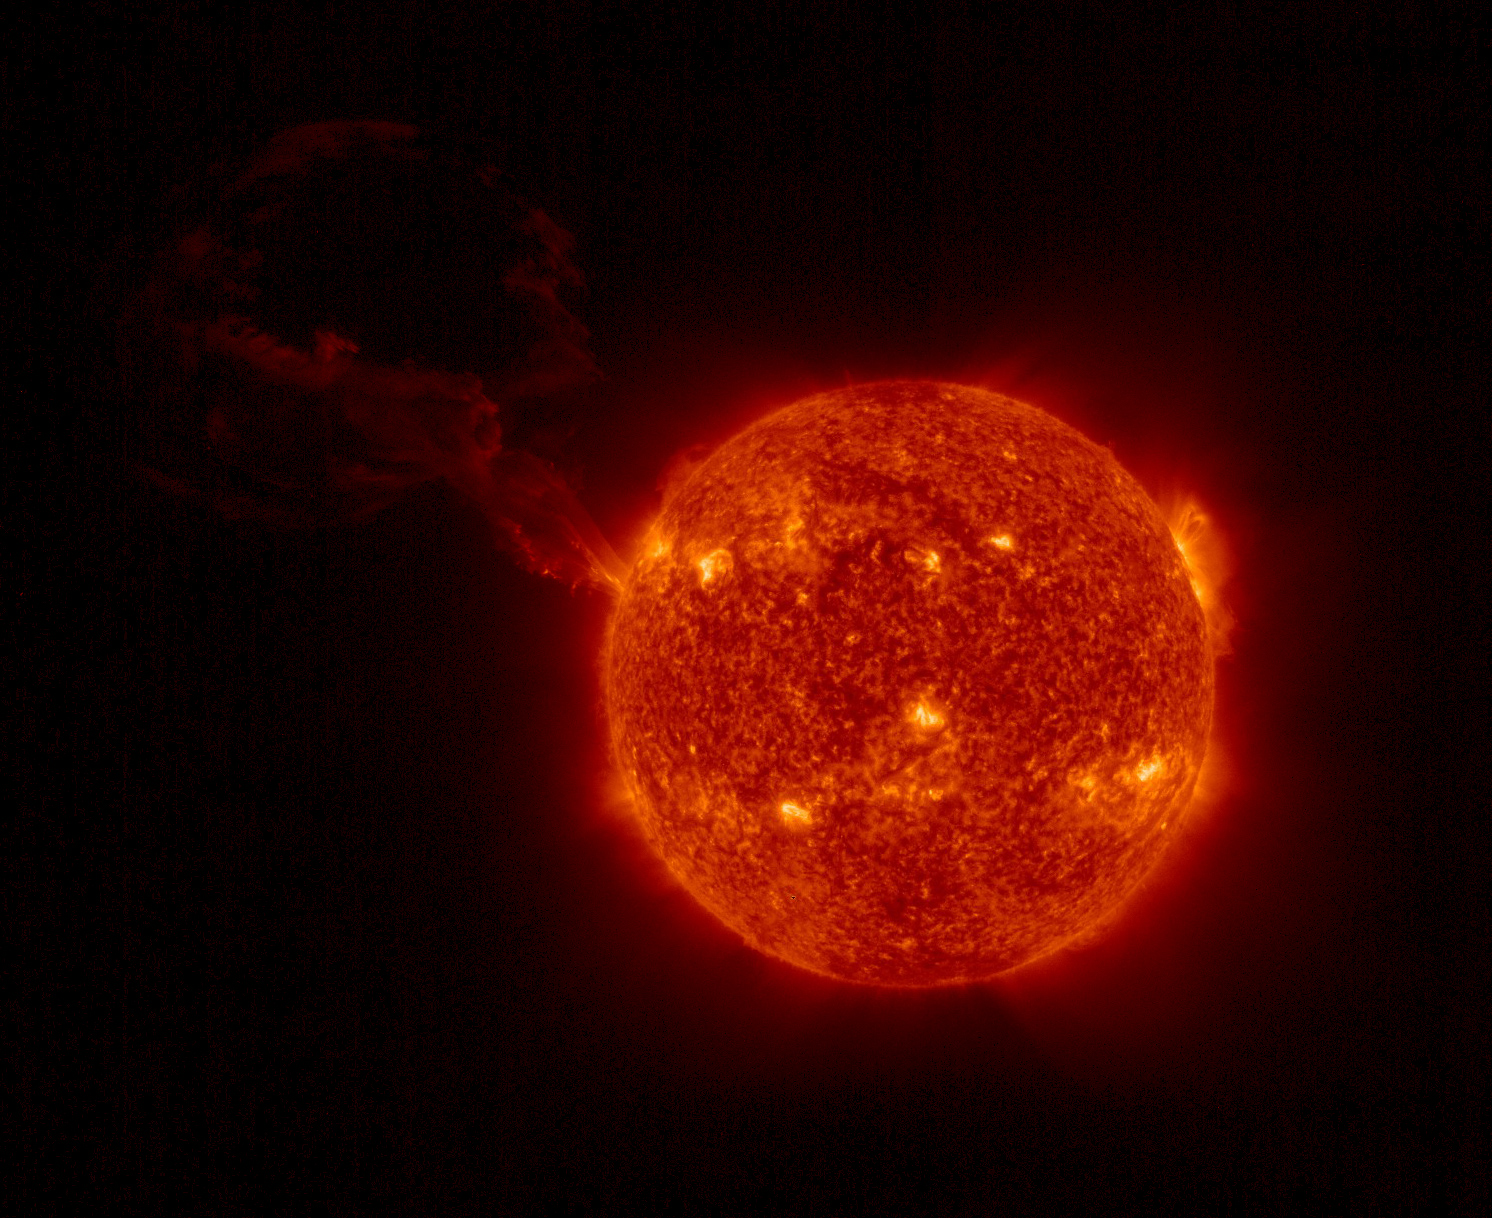 Space Image Shows RecordBreaking Solar Eruption Spanning Millions of Miles